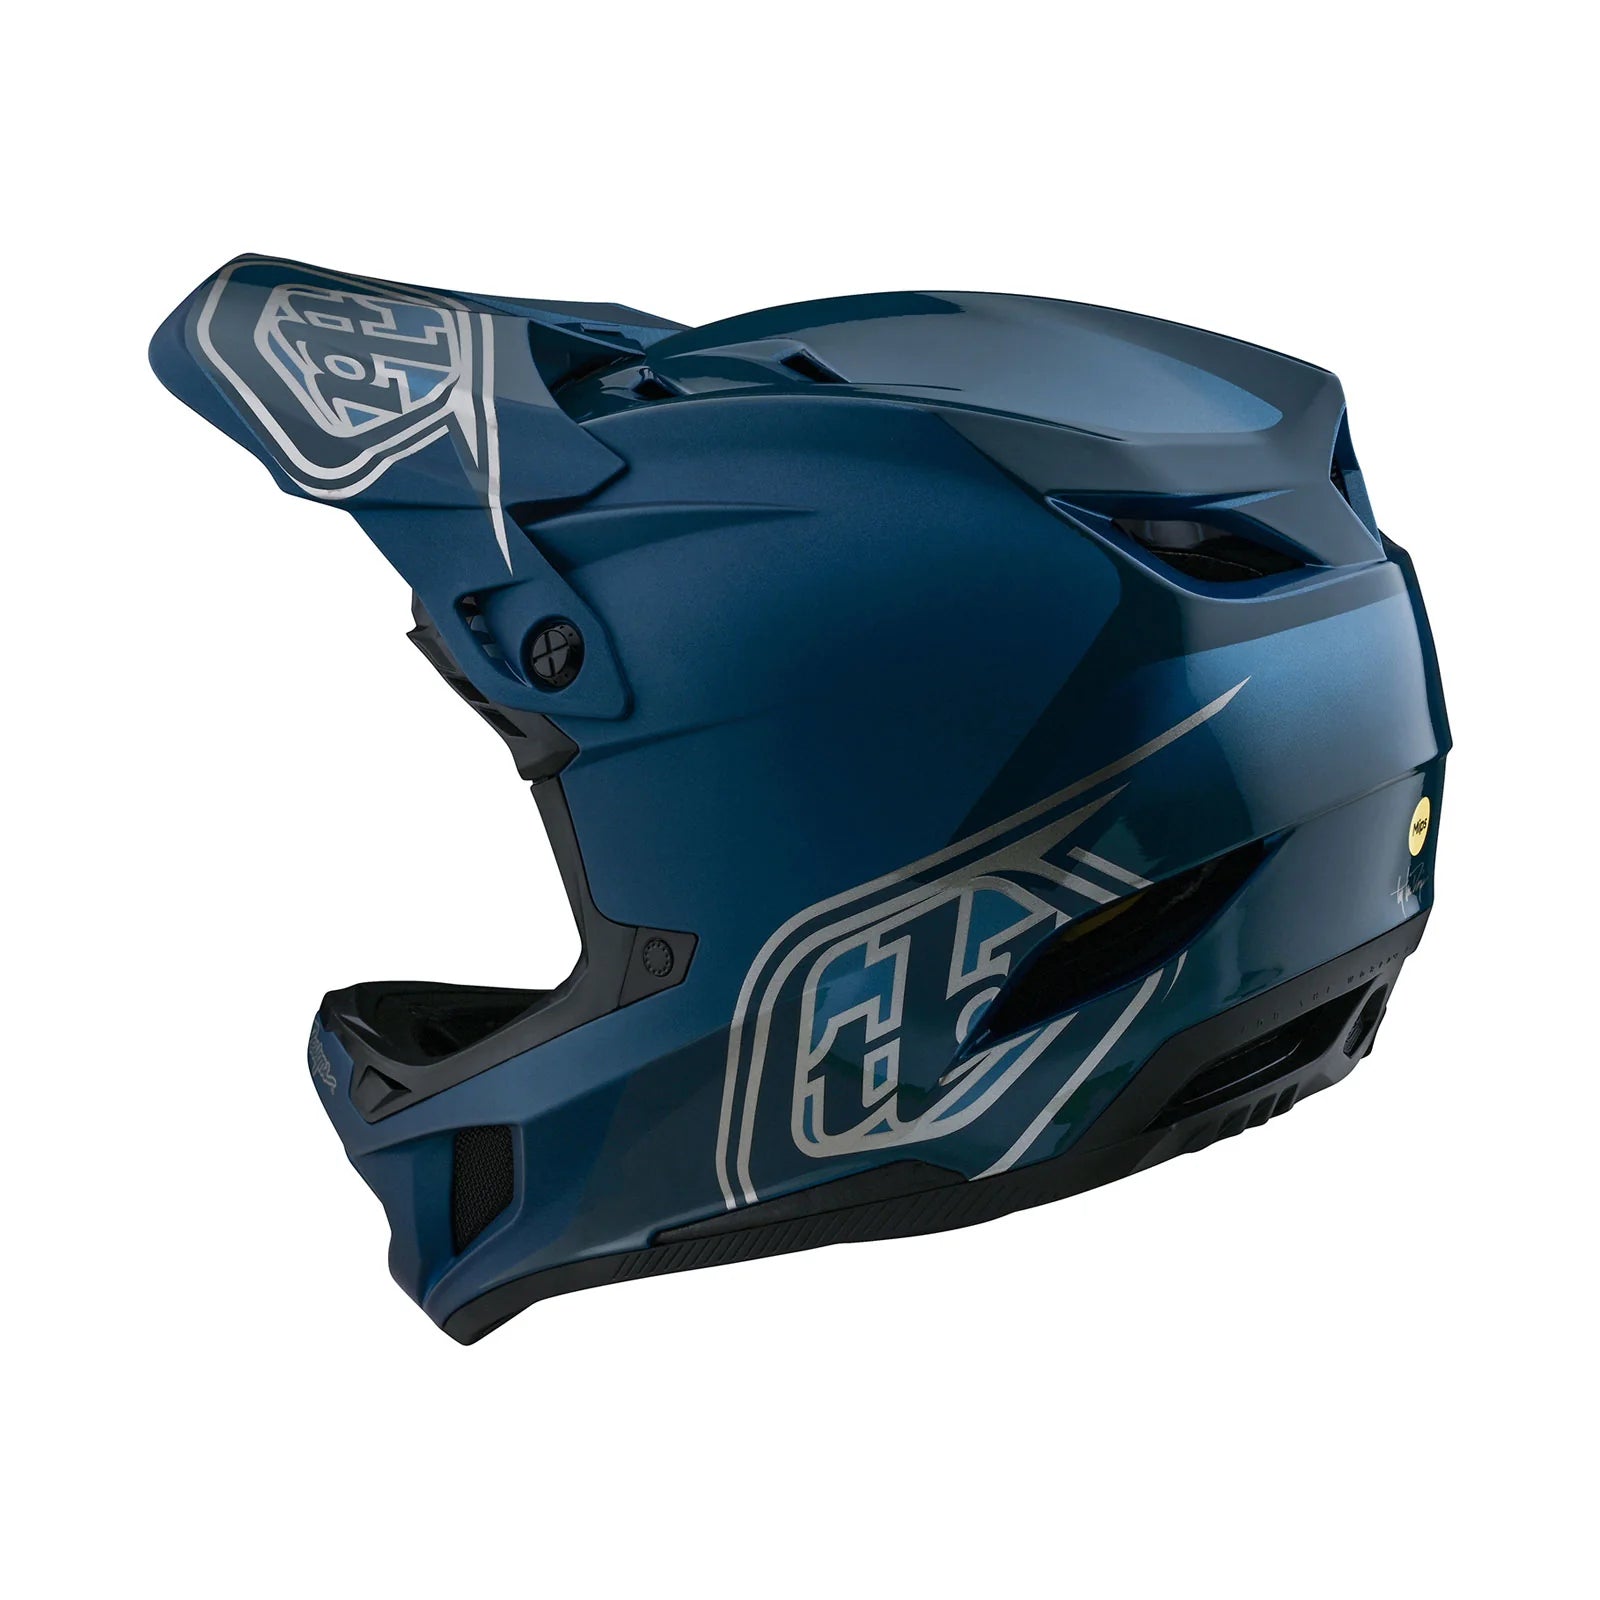 The TLD D4 AS Polyacrylite Helmet W/MIPS Shadow Blue is shown on a white background, emphasizing its safety features.